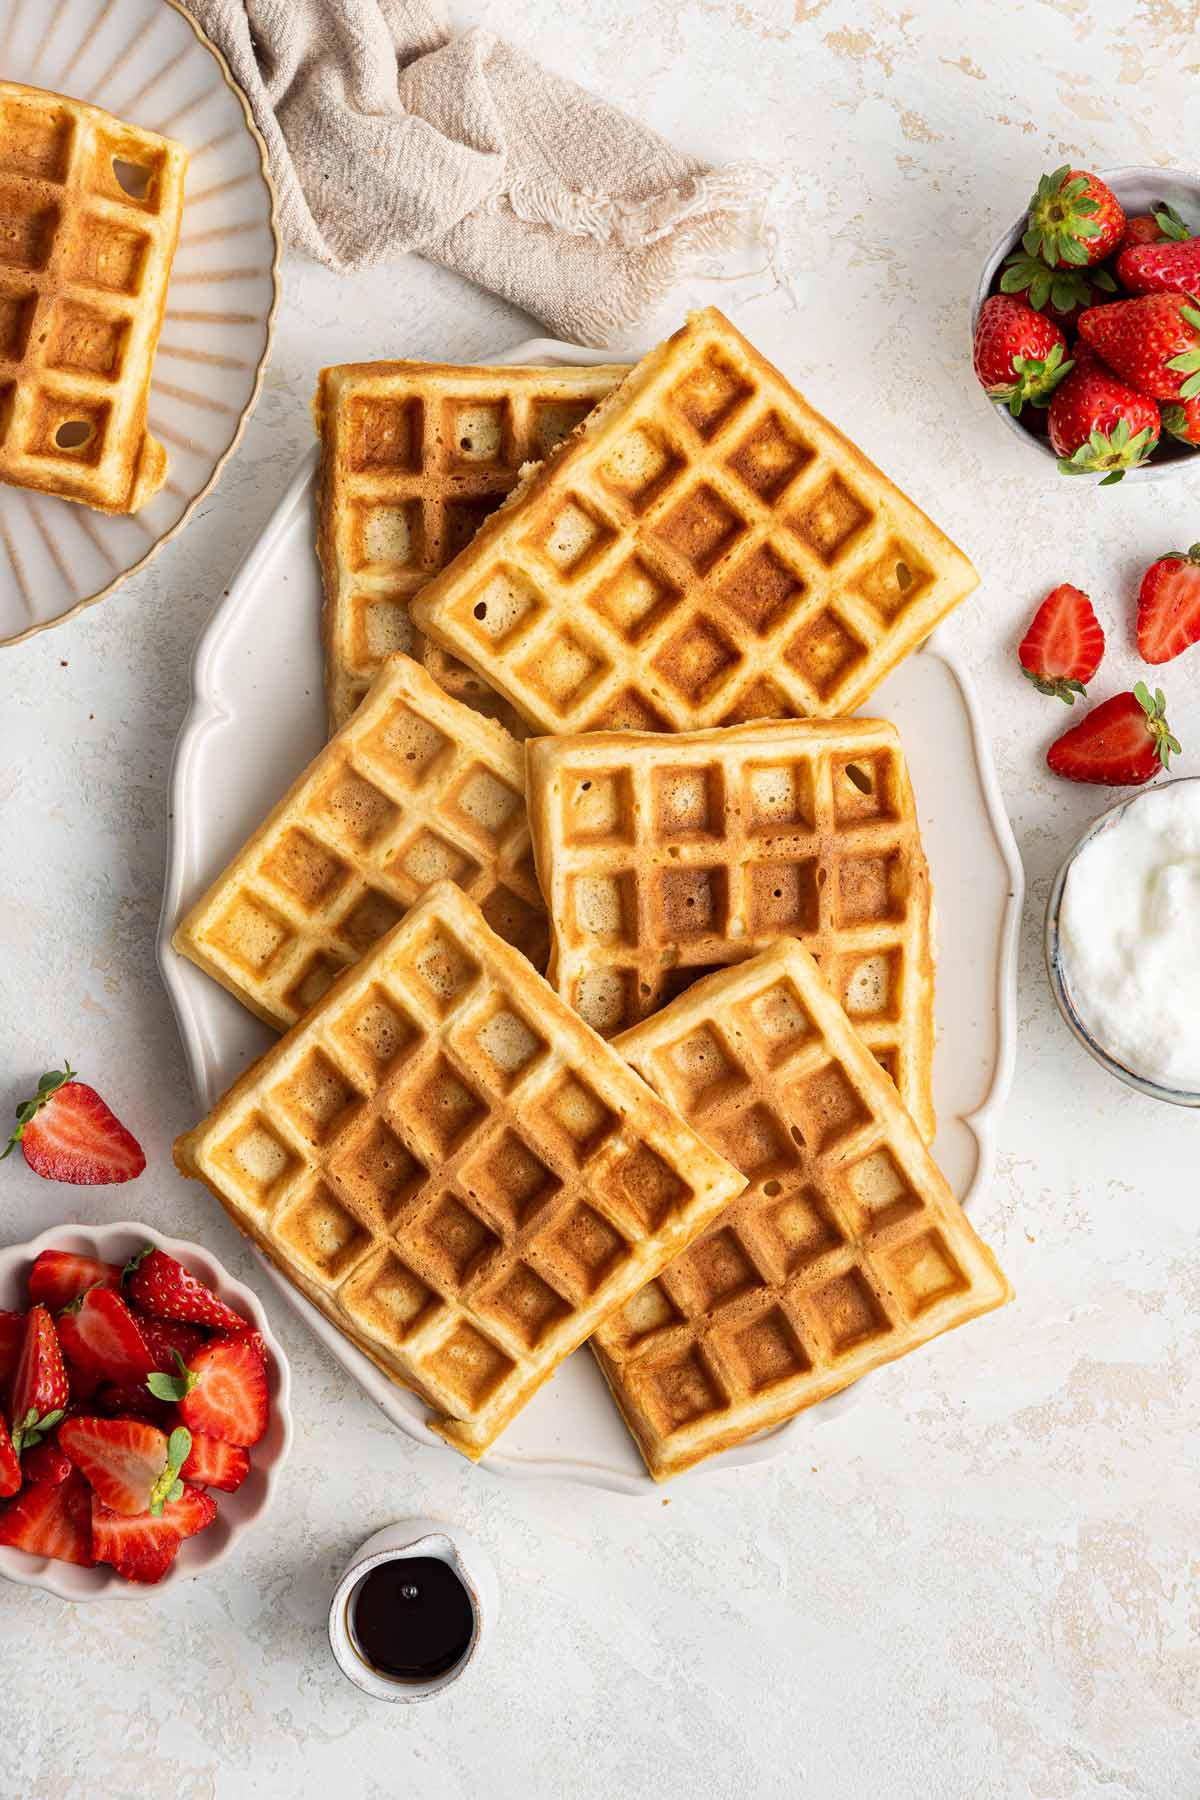 golden brown belgian waffles on a serving plate surrounded by strawberries and whipped cream